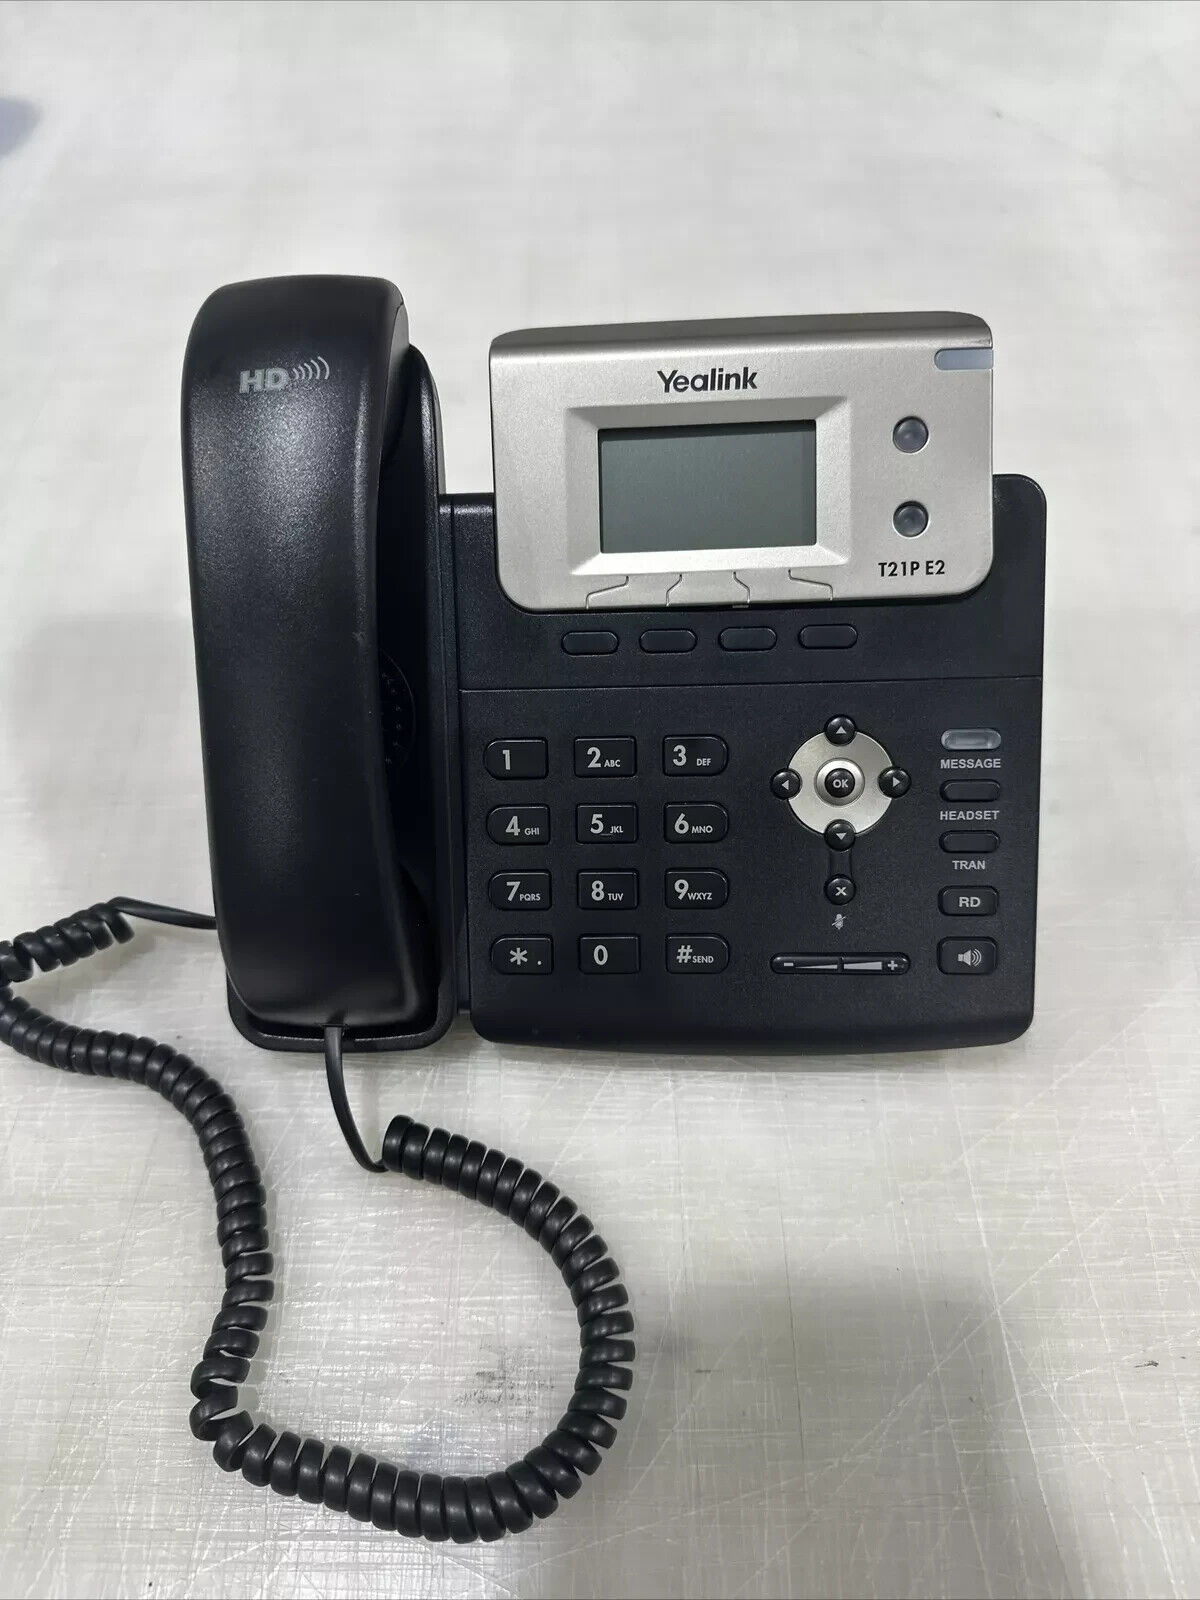 Yealink SIP-T21P E2 IP Phone with Stand PoE Warranty VoIP Tested